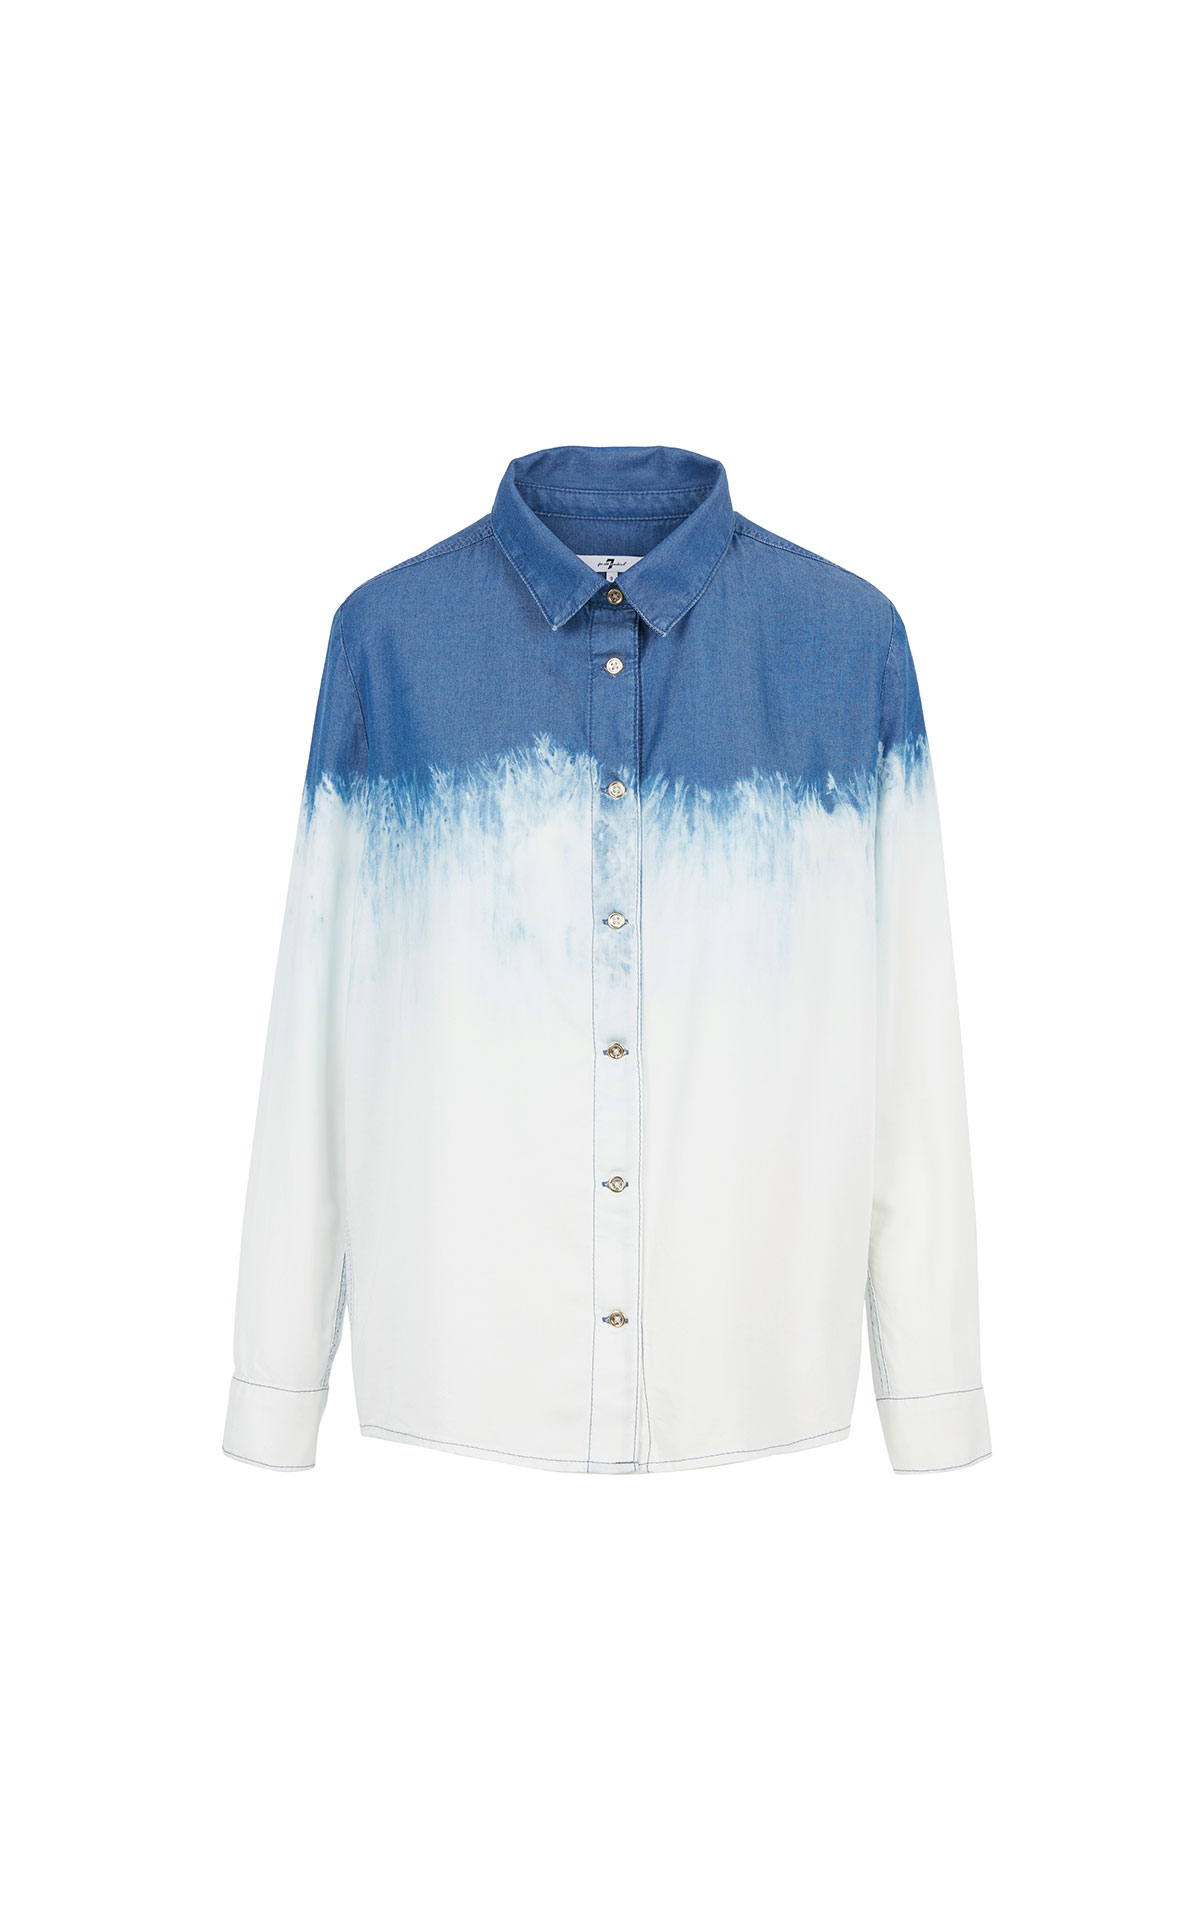 7 For all Mankind Marie shirt from Bicester Village